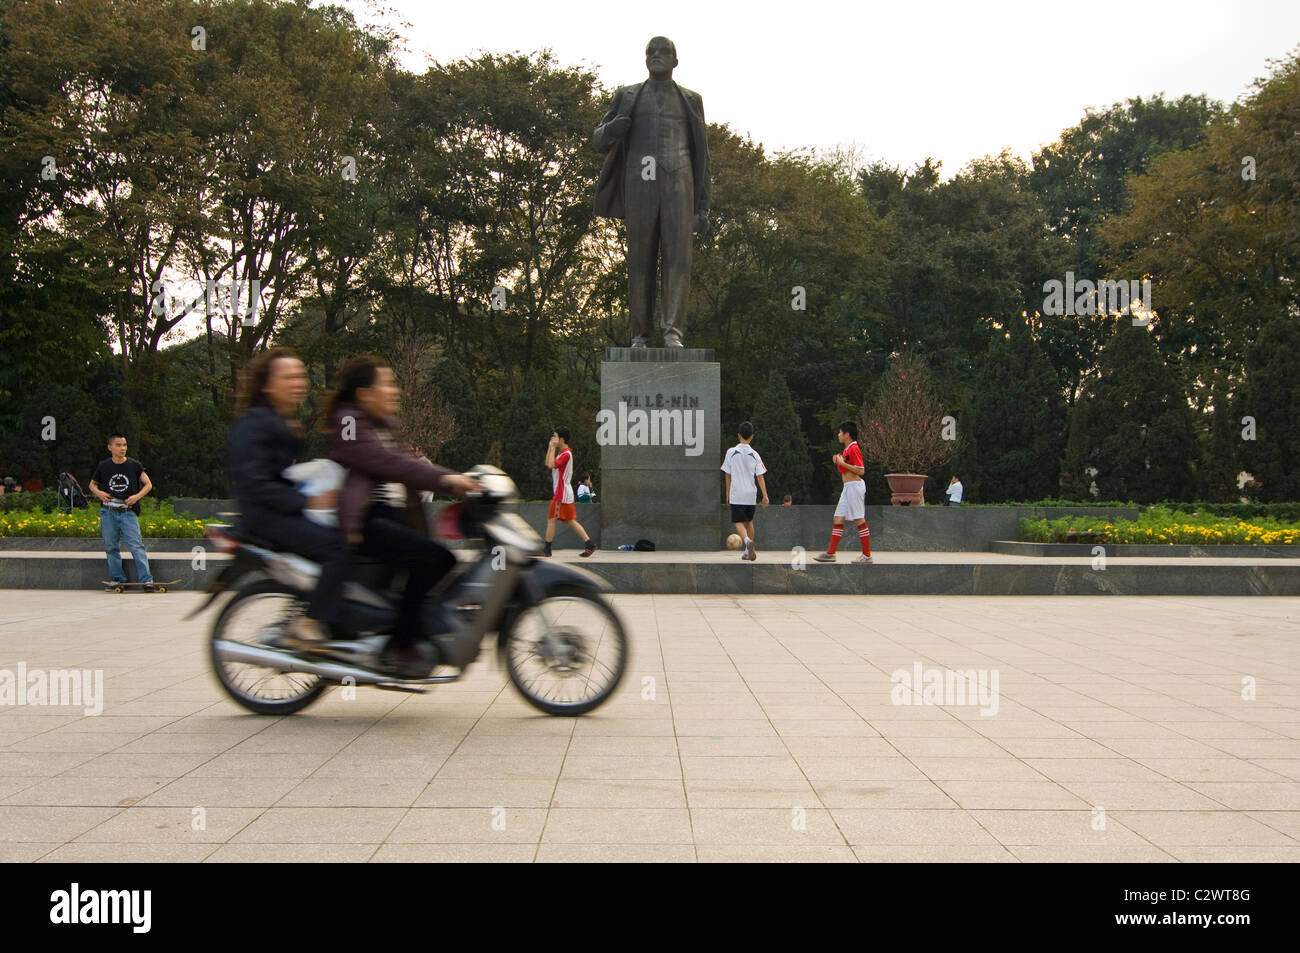 Horizontal wide angle of Lenin's statue in Lenin Park aka Reunification Park (Cong Vien Lenin) with a moped driving passed. Stock Photo